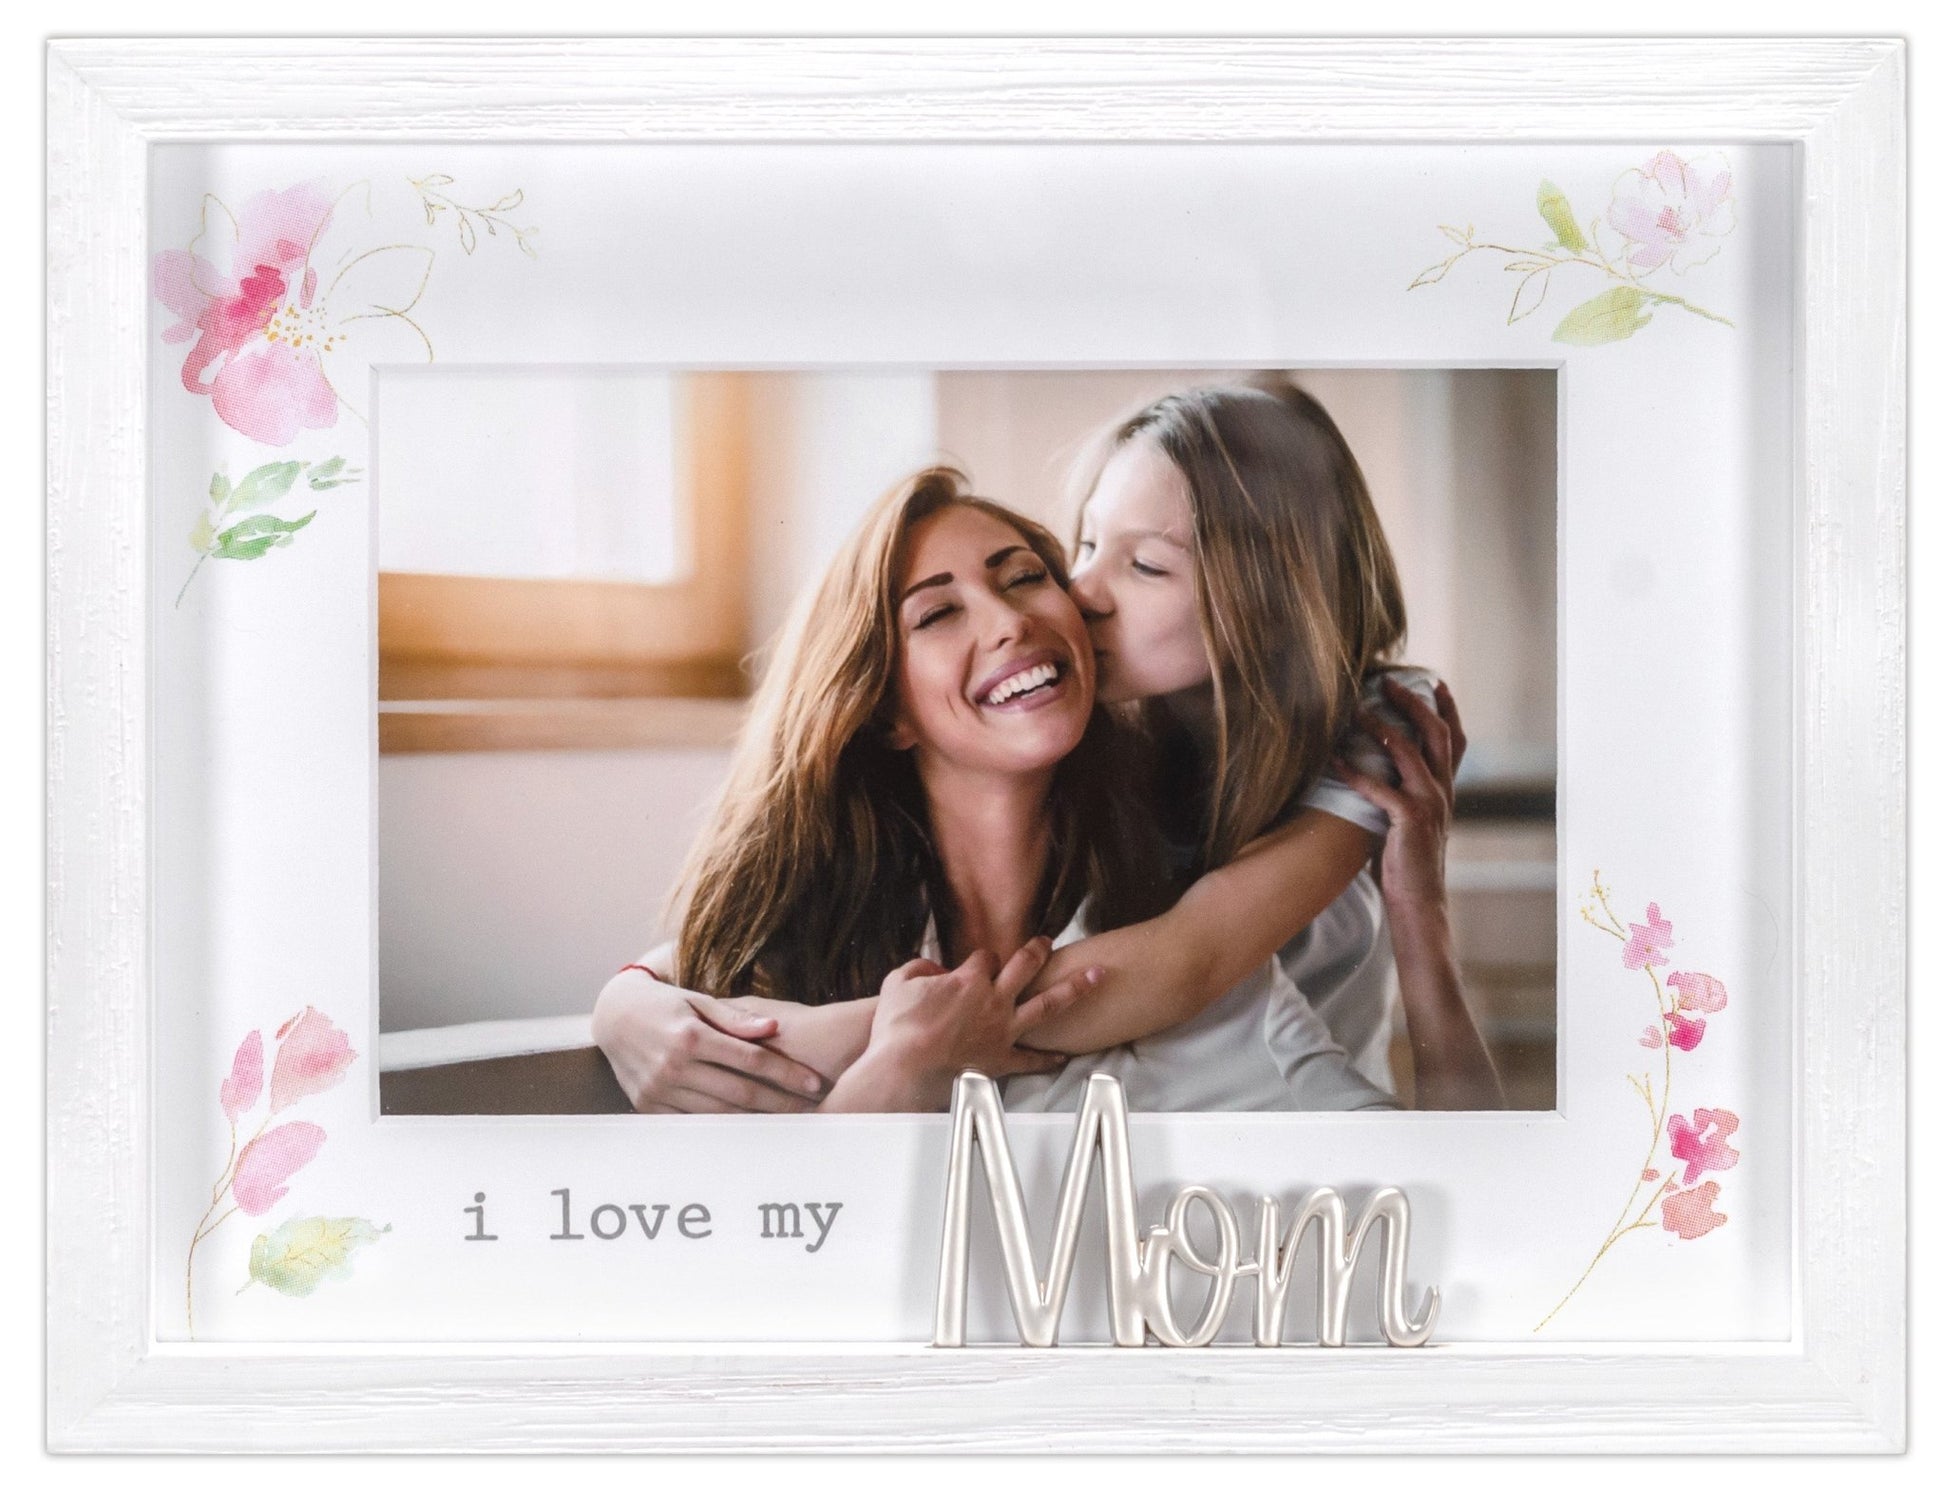 I Love My Mom Floral Matted Rustic White Wood Picture Frame with Metal Word Attachment Holds 4"x6" Photo